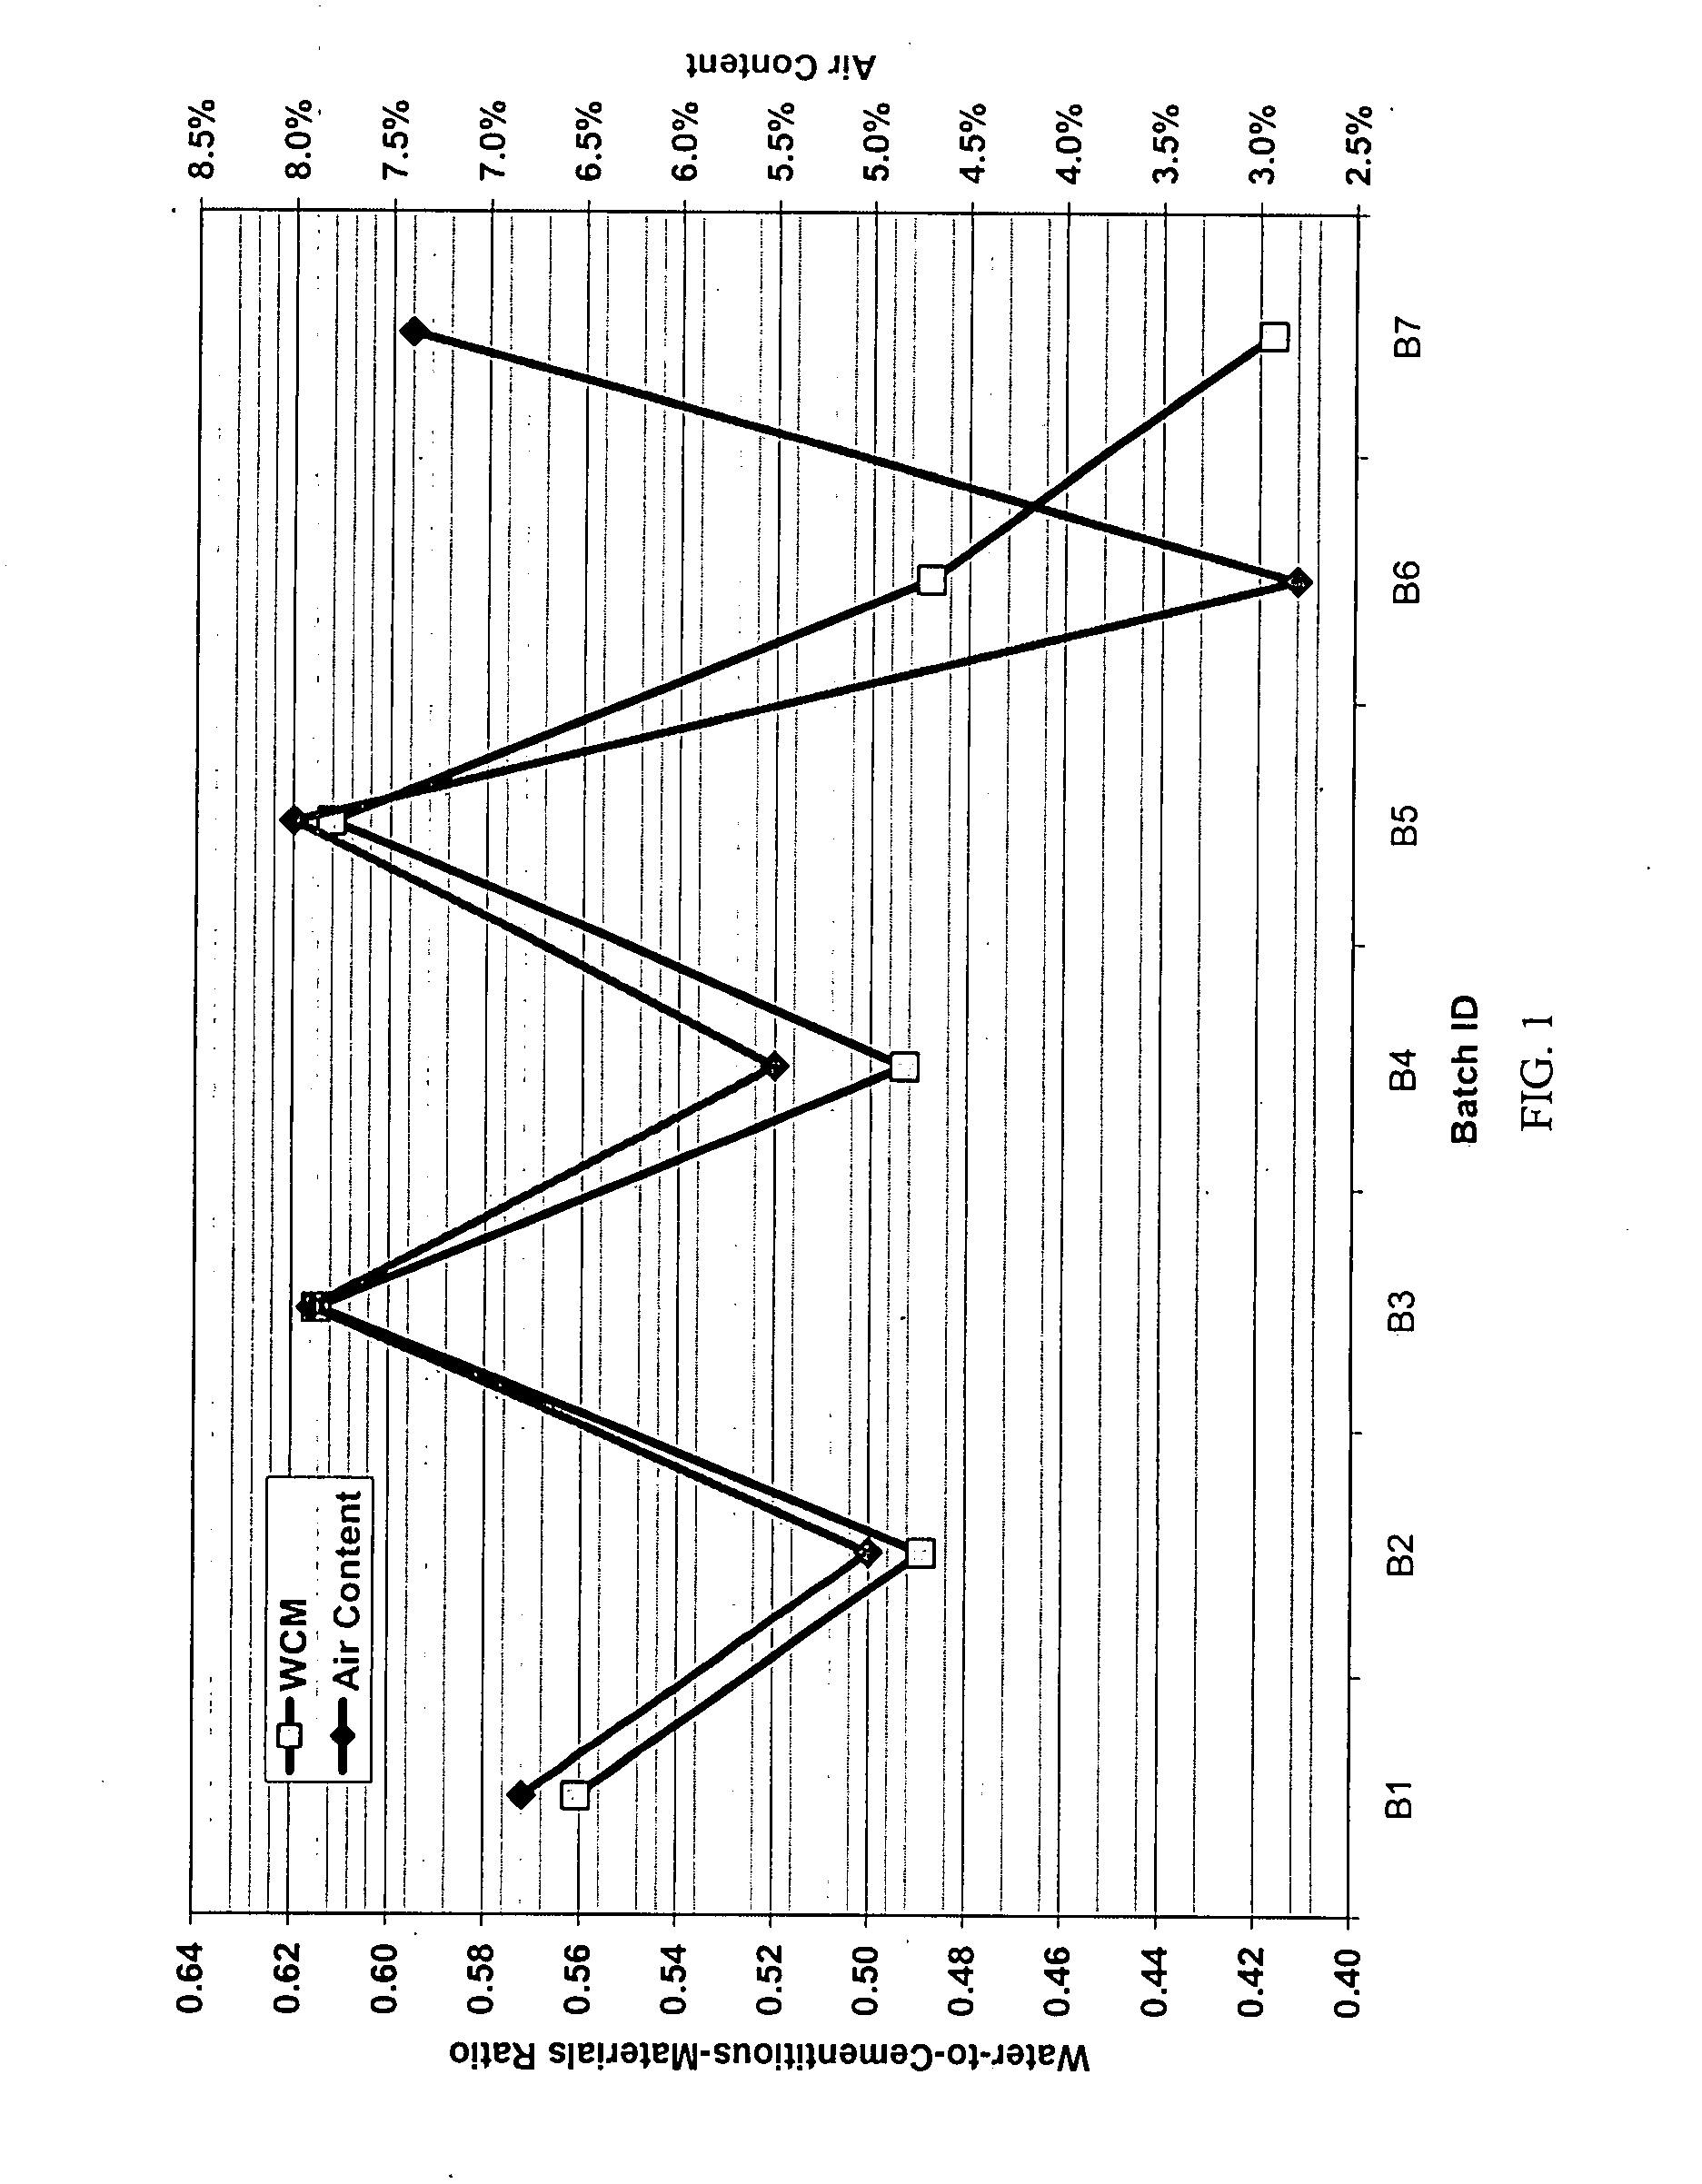 Method and system for concrete quality control based on the concrete's maturity